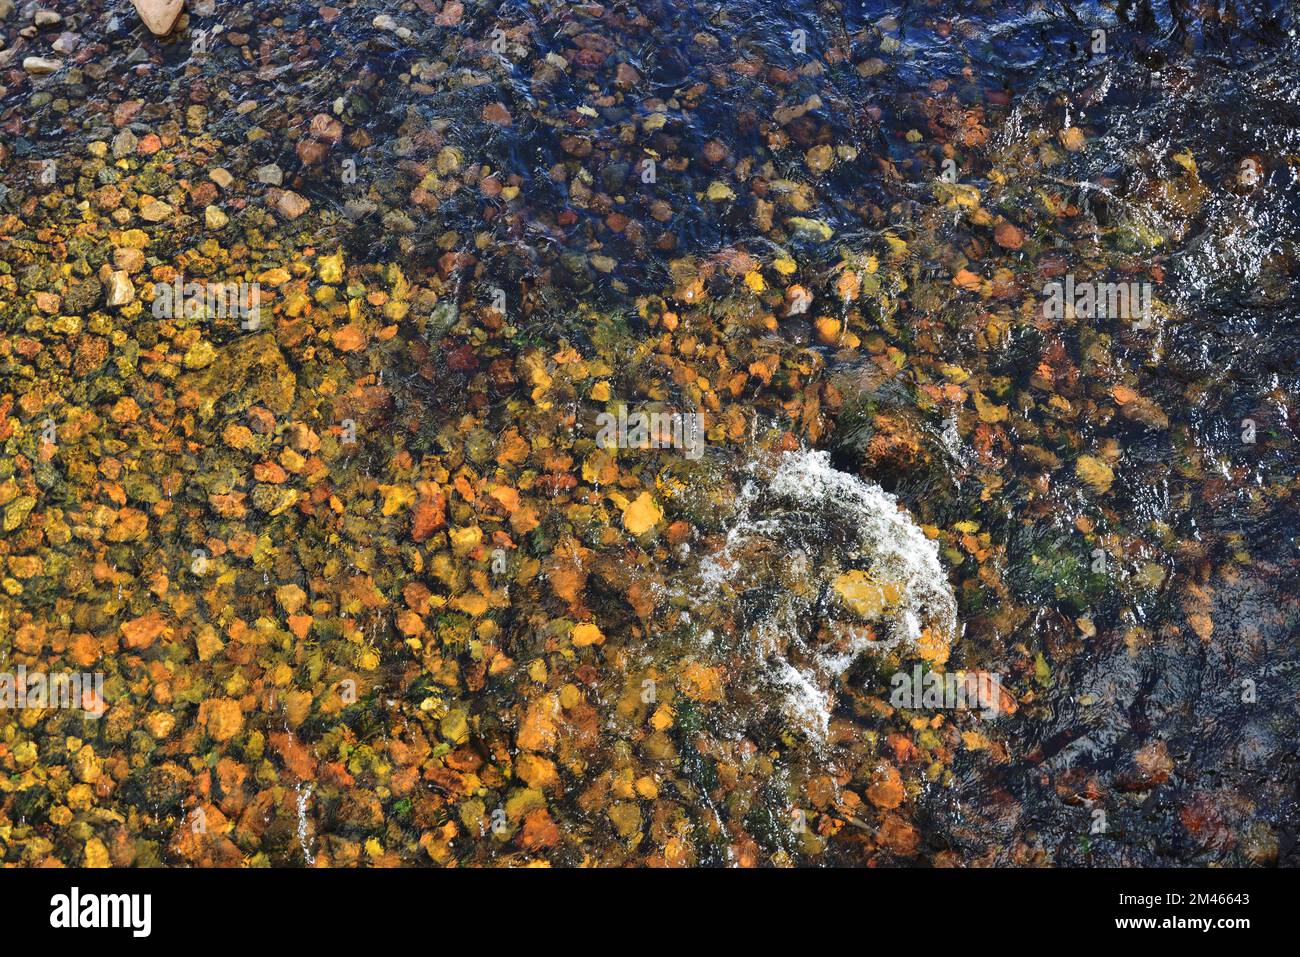 Shallow water flowing over a riverbed of stones. Stock Photo